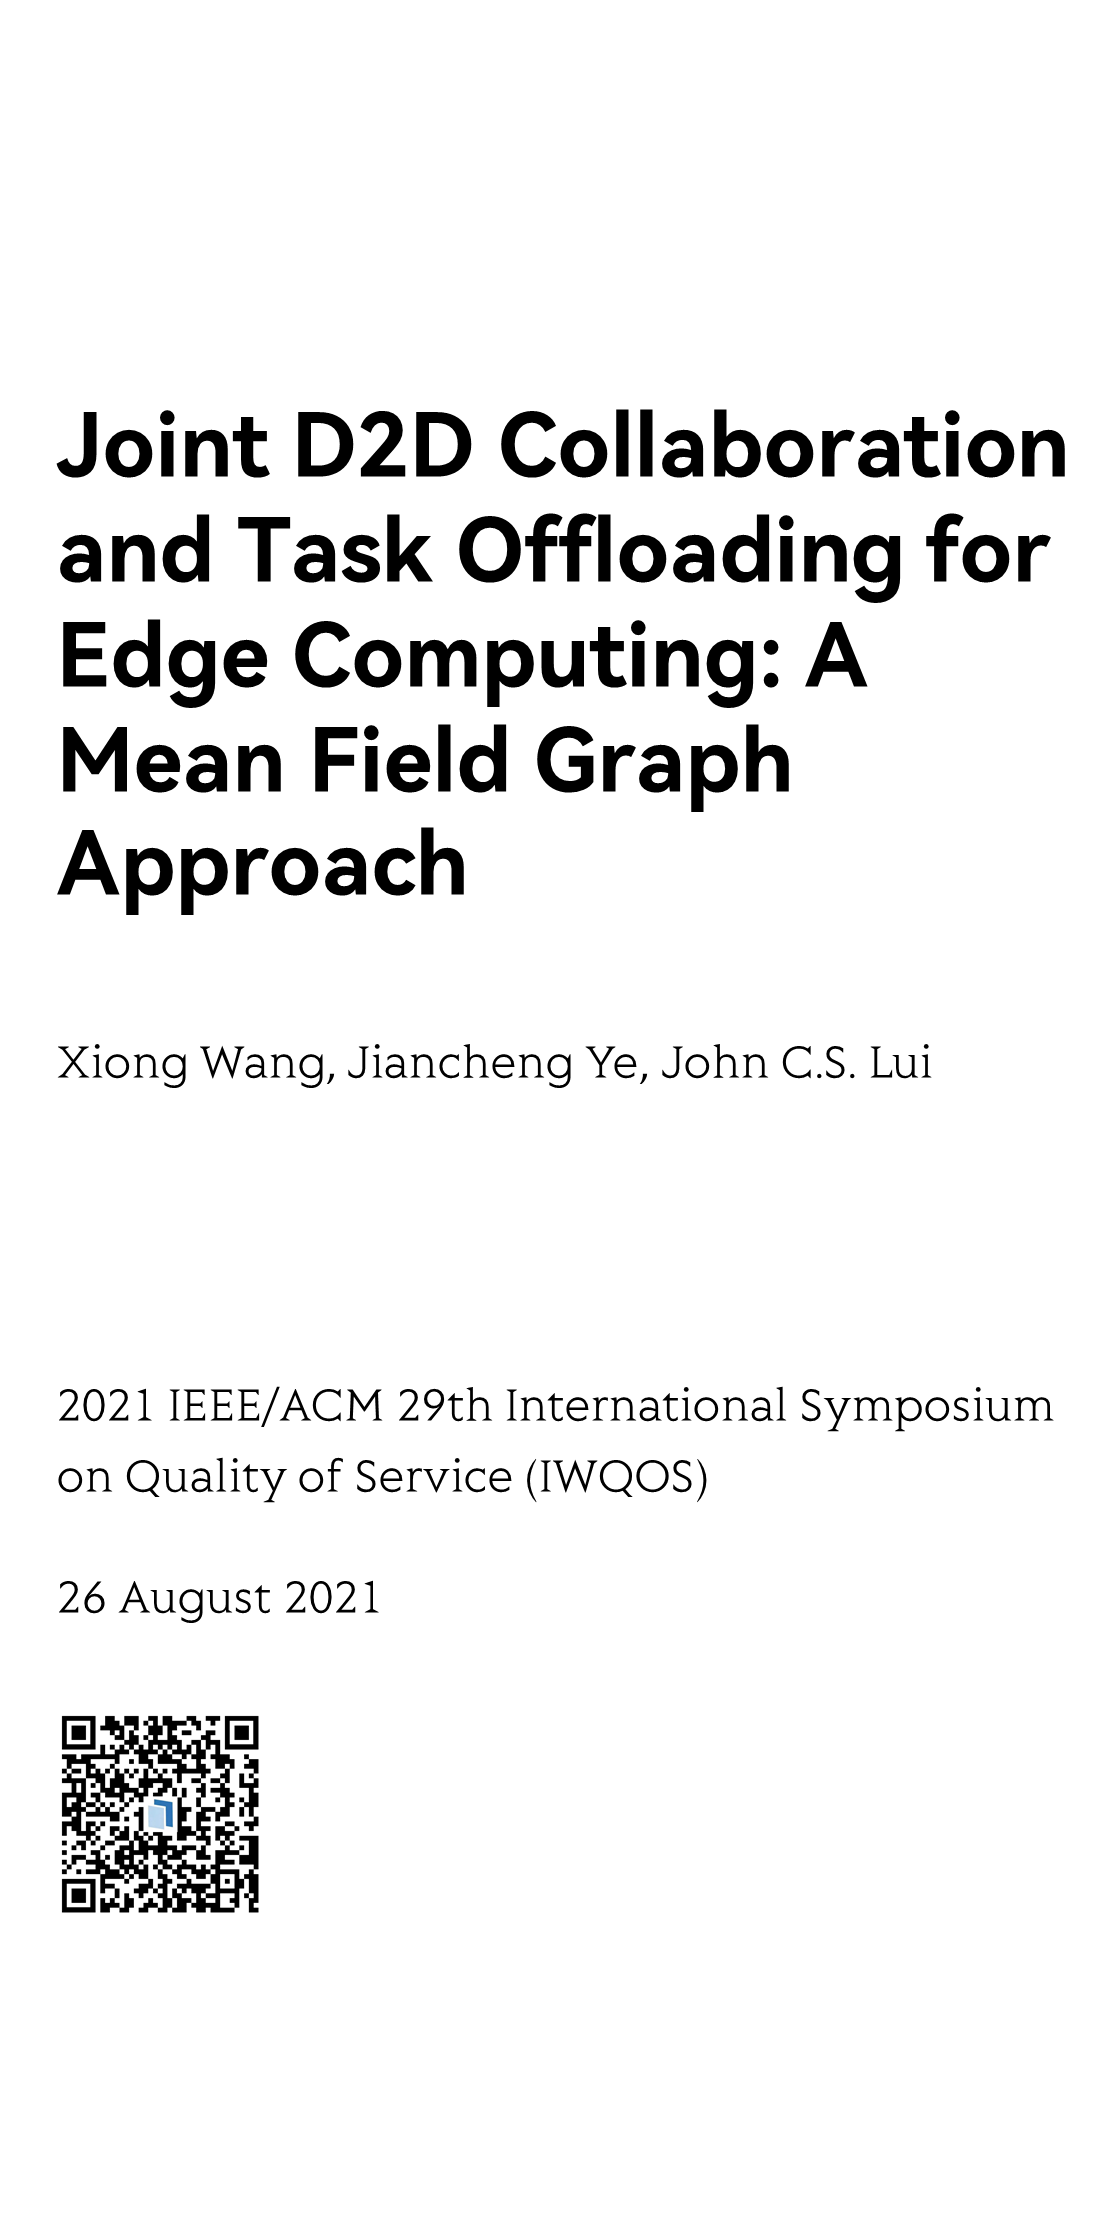 Joint D2D Collaboration and Task Offloading for Edge Computing: A Mean Field Graph Approach_1